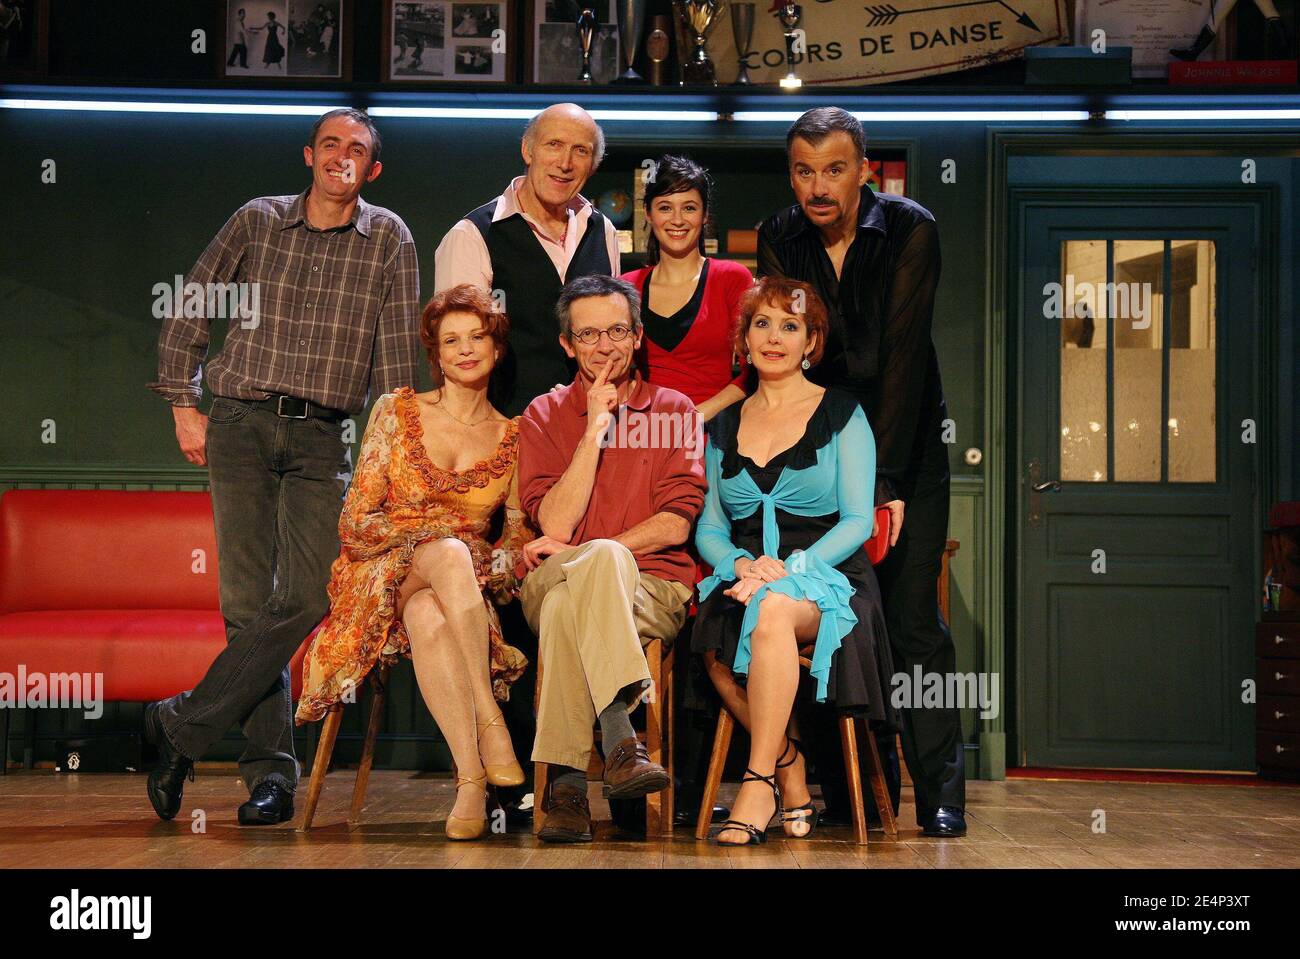 Cast members (L to R) Laurent Gendron, Rufus, Melanie Bernier, Bernard Alane, Agathe Nathanson, Director Patrice Leconte and Isabelle Spade pose during the curtain call of Heloise at the Theatre de l'Atelier in Paris, France on January 21, 2008. Photo by Denis Guignebourg/ABACAPRESS.COM Stock Photo